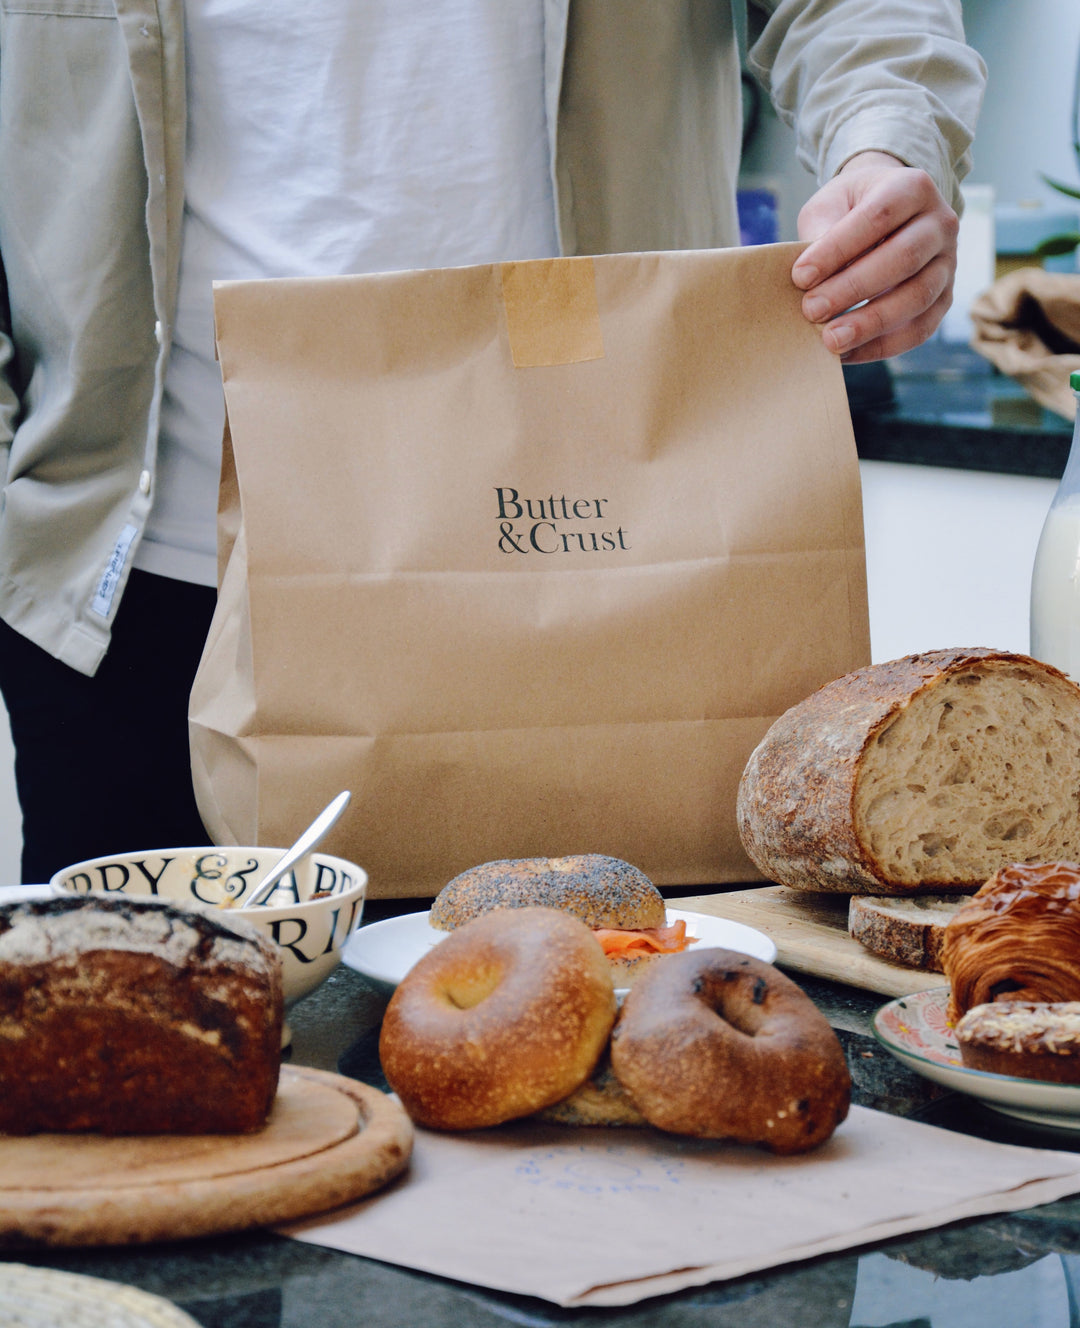 Hand holding Butter & Crust bundle with a selection of artisan breakfast goods int he foreground including: bagels, rye bread, sourdough and pastries.